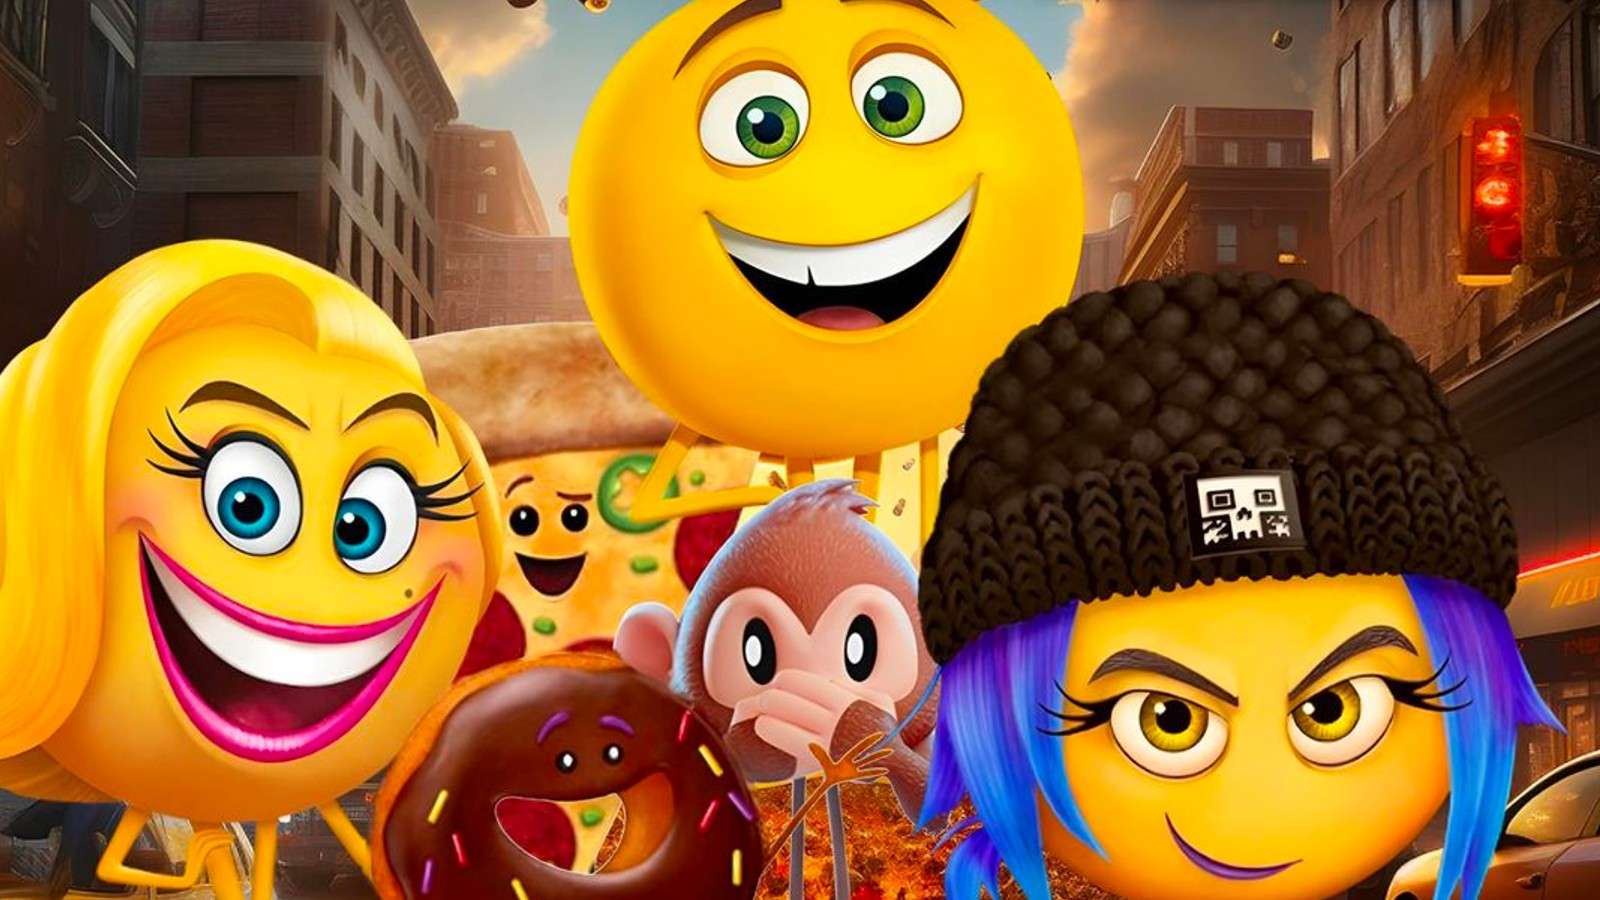 The fake poster for The Emoji Movie 2